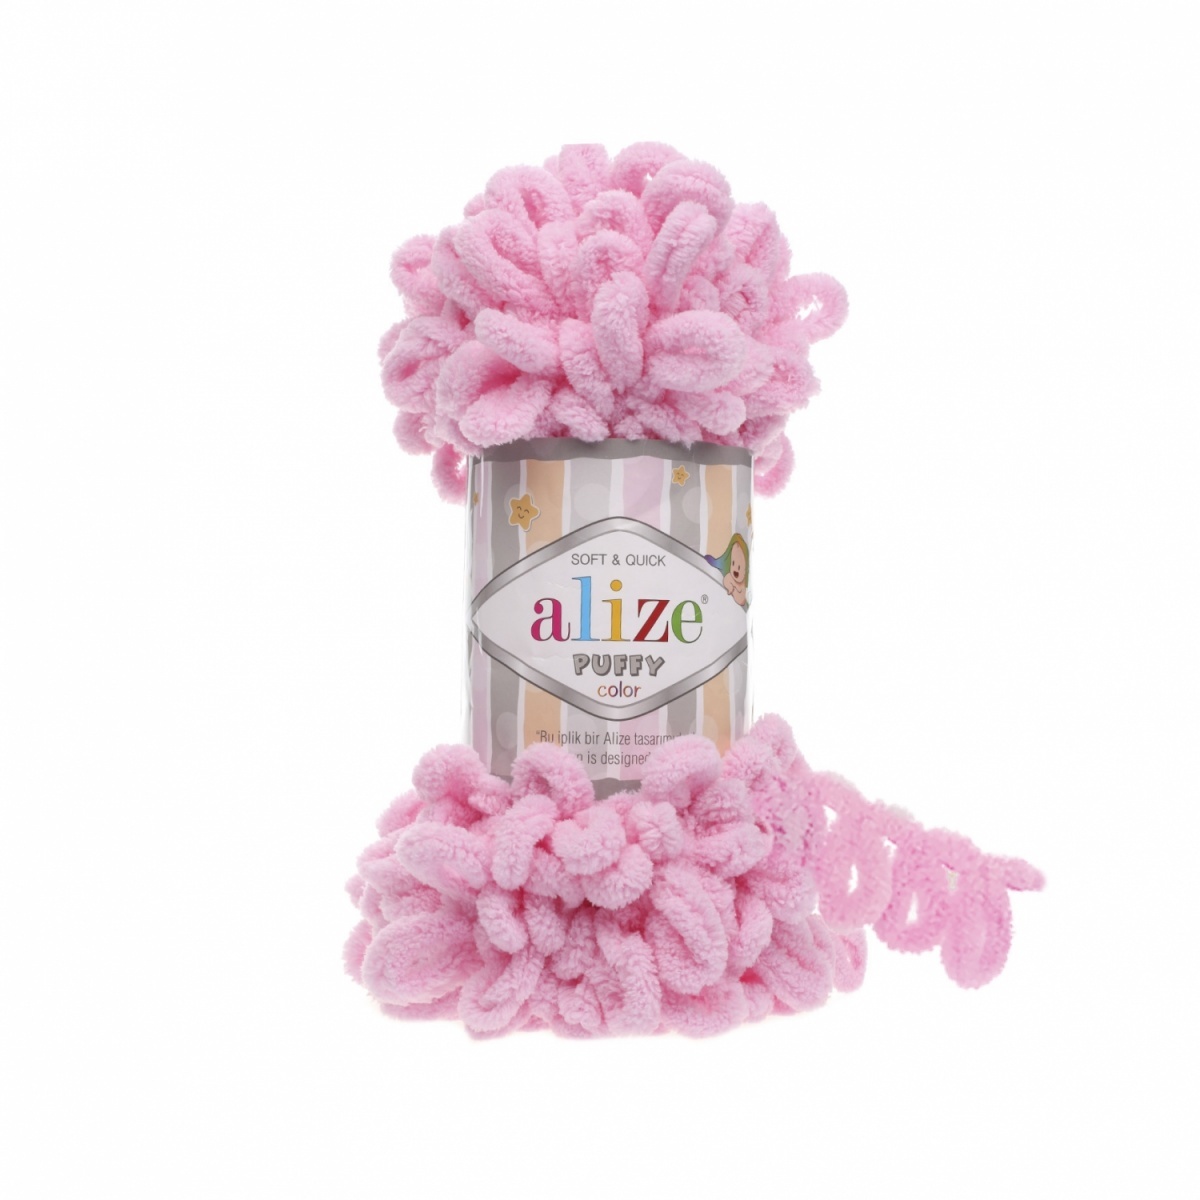 Alize Puffy, 100% Micropolyester 5 Skein Value Pack, 500g фото 28